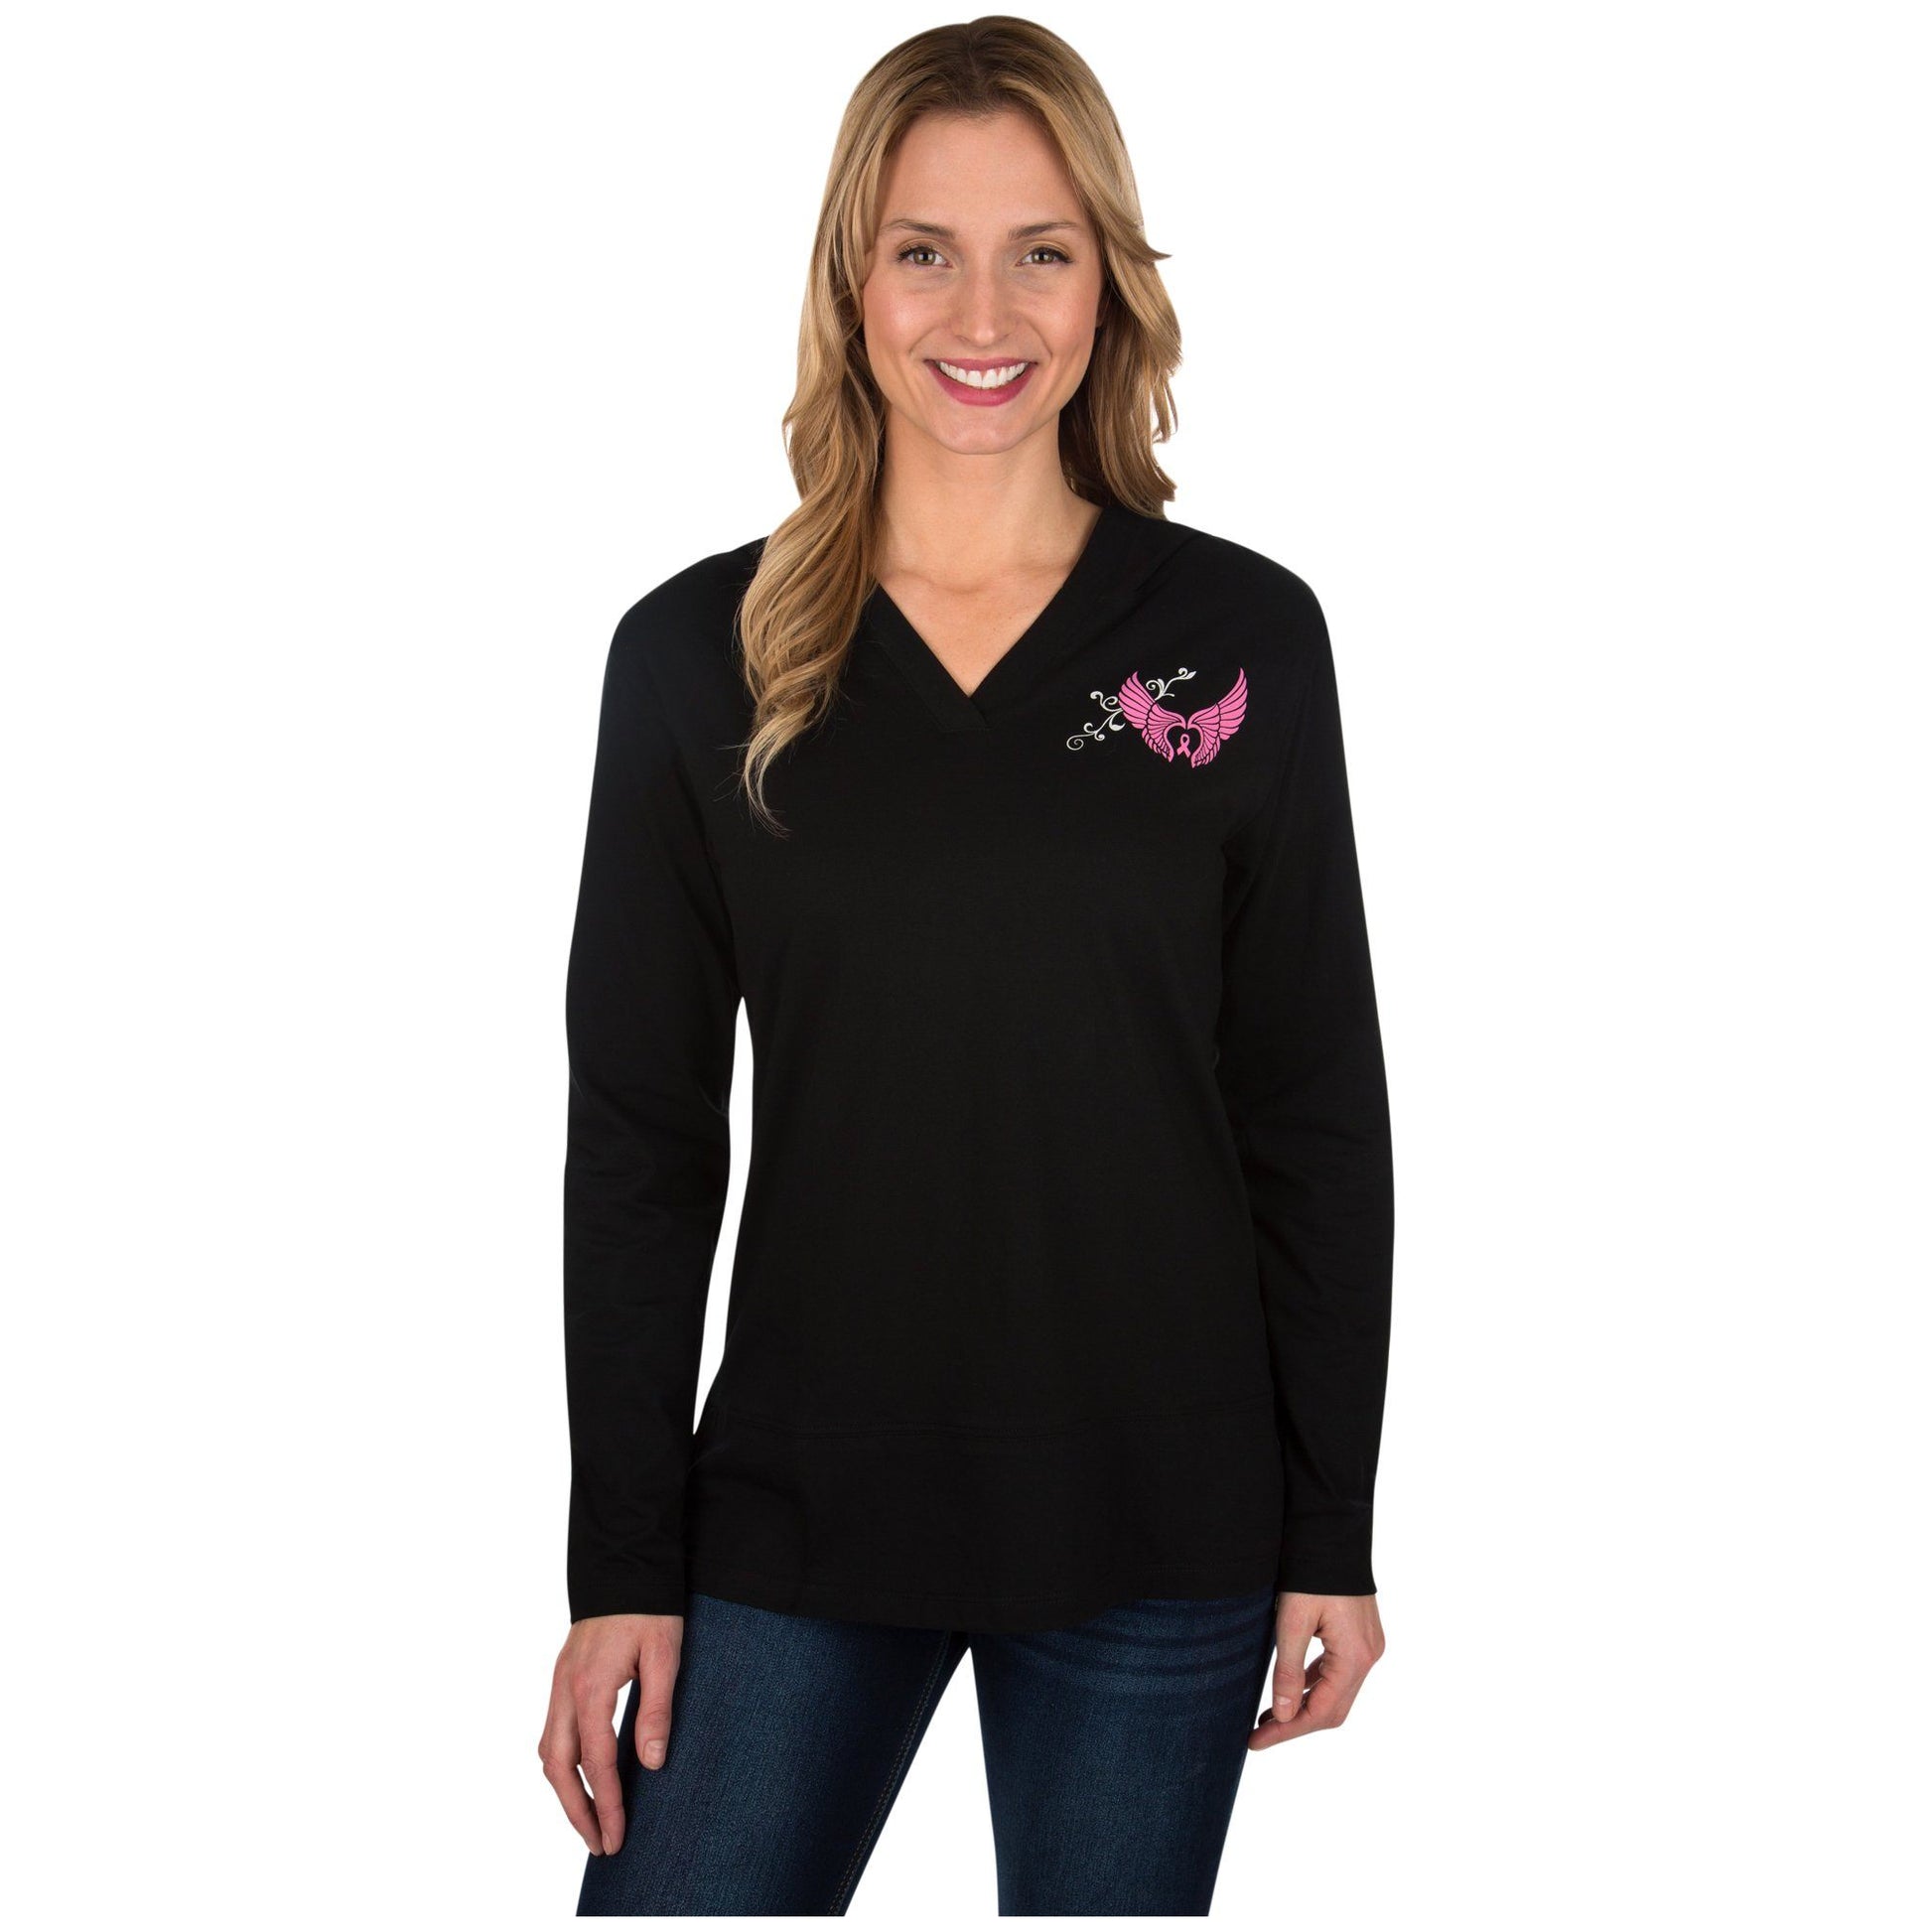 Wings Of An Angel Pink Ribbon Hooded Lightweight Tunic